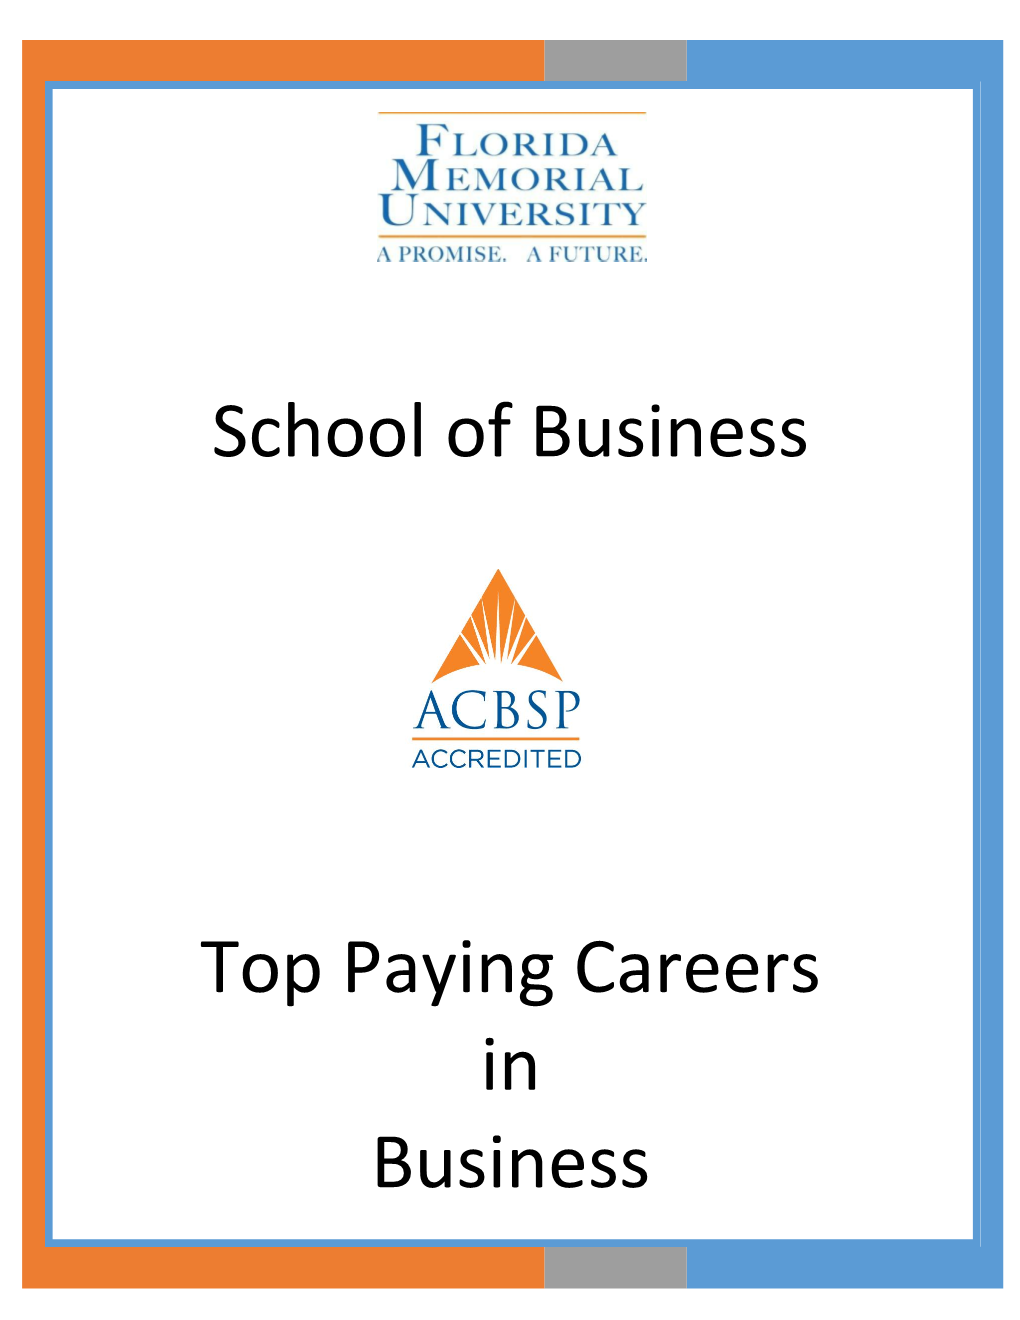 School of Business Top Paying Careers in Business